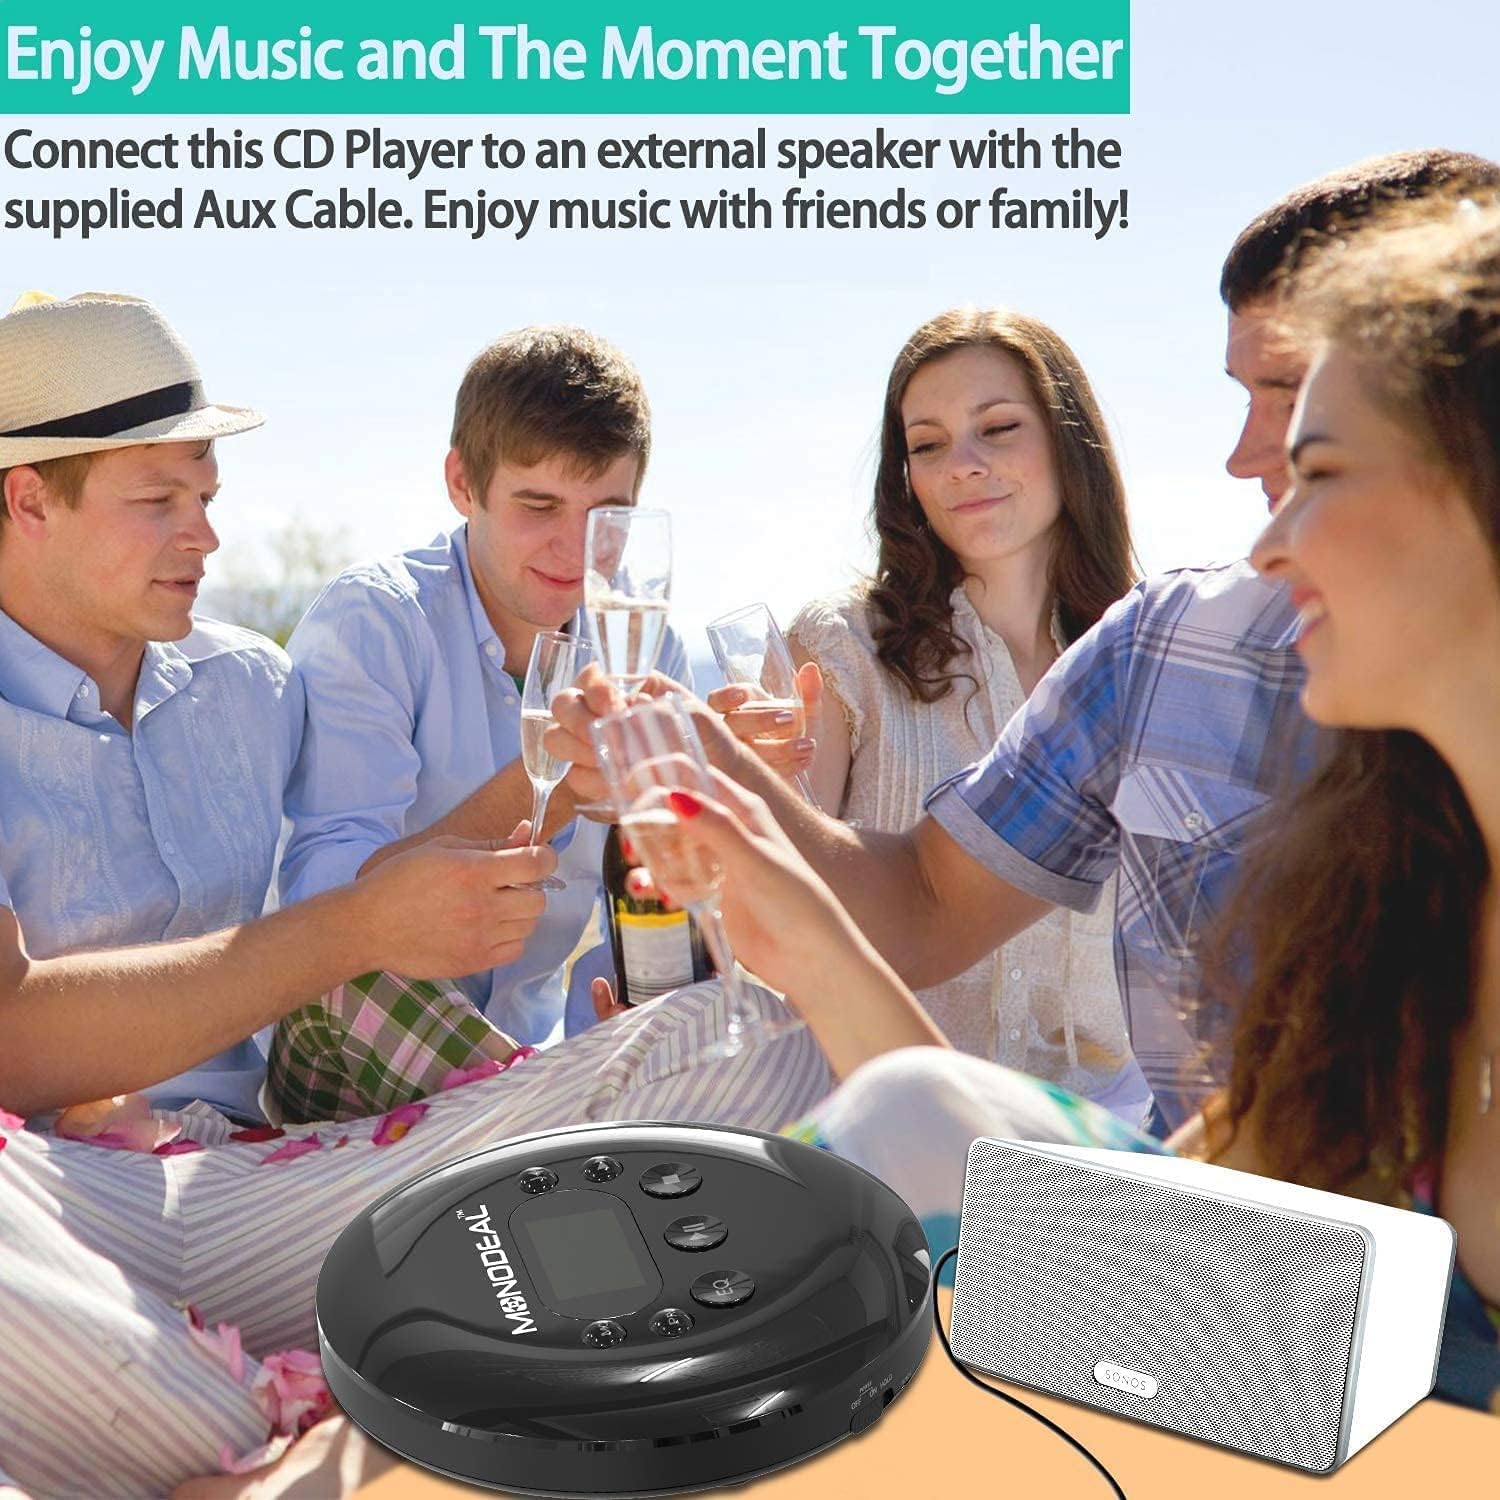 【𝟐𝟎𝟐4 𝐔𝐩𝐠𝐫𝐚𝐝𝐞𝐝】 CD Player Portable, MONODEAL Portable CD Player with Headphones,Small Personal CD Player with LCD Display,Anti-Skip/Shockproof, Rechargeable Walkman CD Player for Car